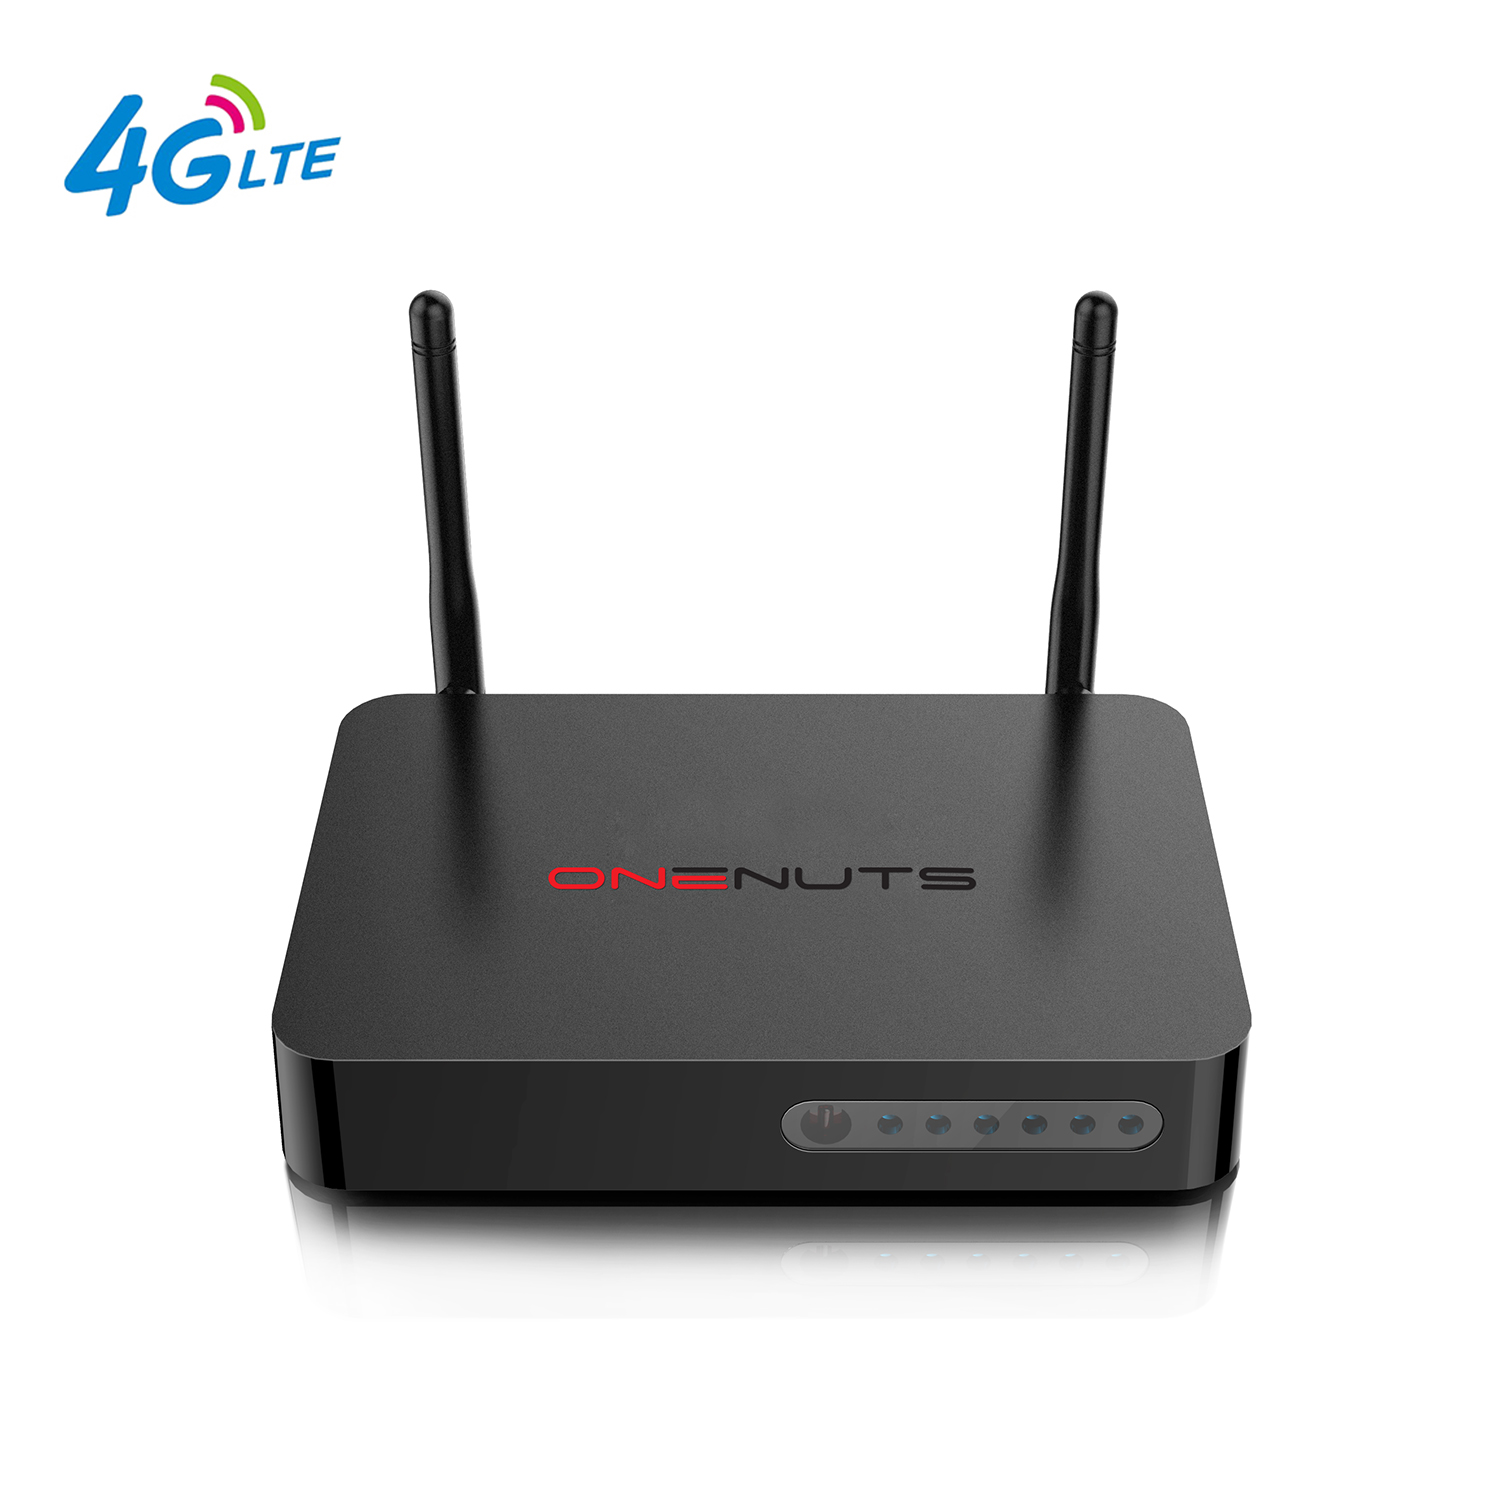 Intelligente Android-TV-Box, Android-TV-Box Huawei WCDMA-Modem integriert